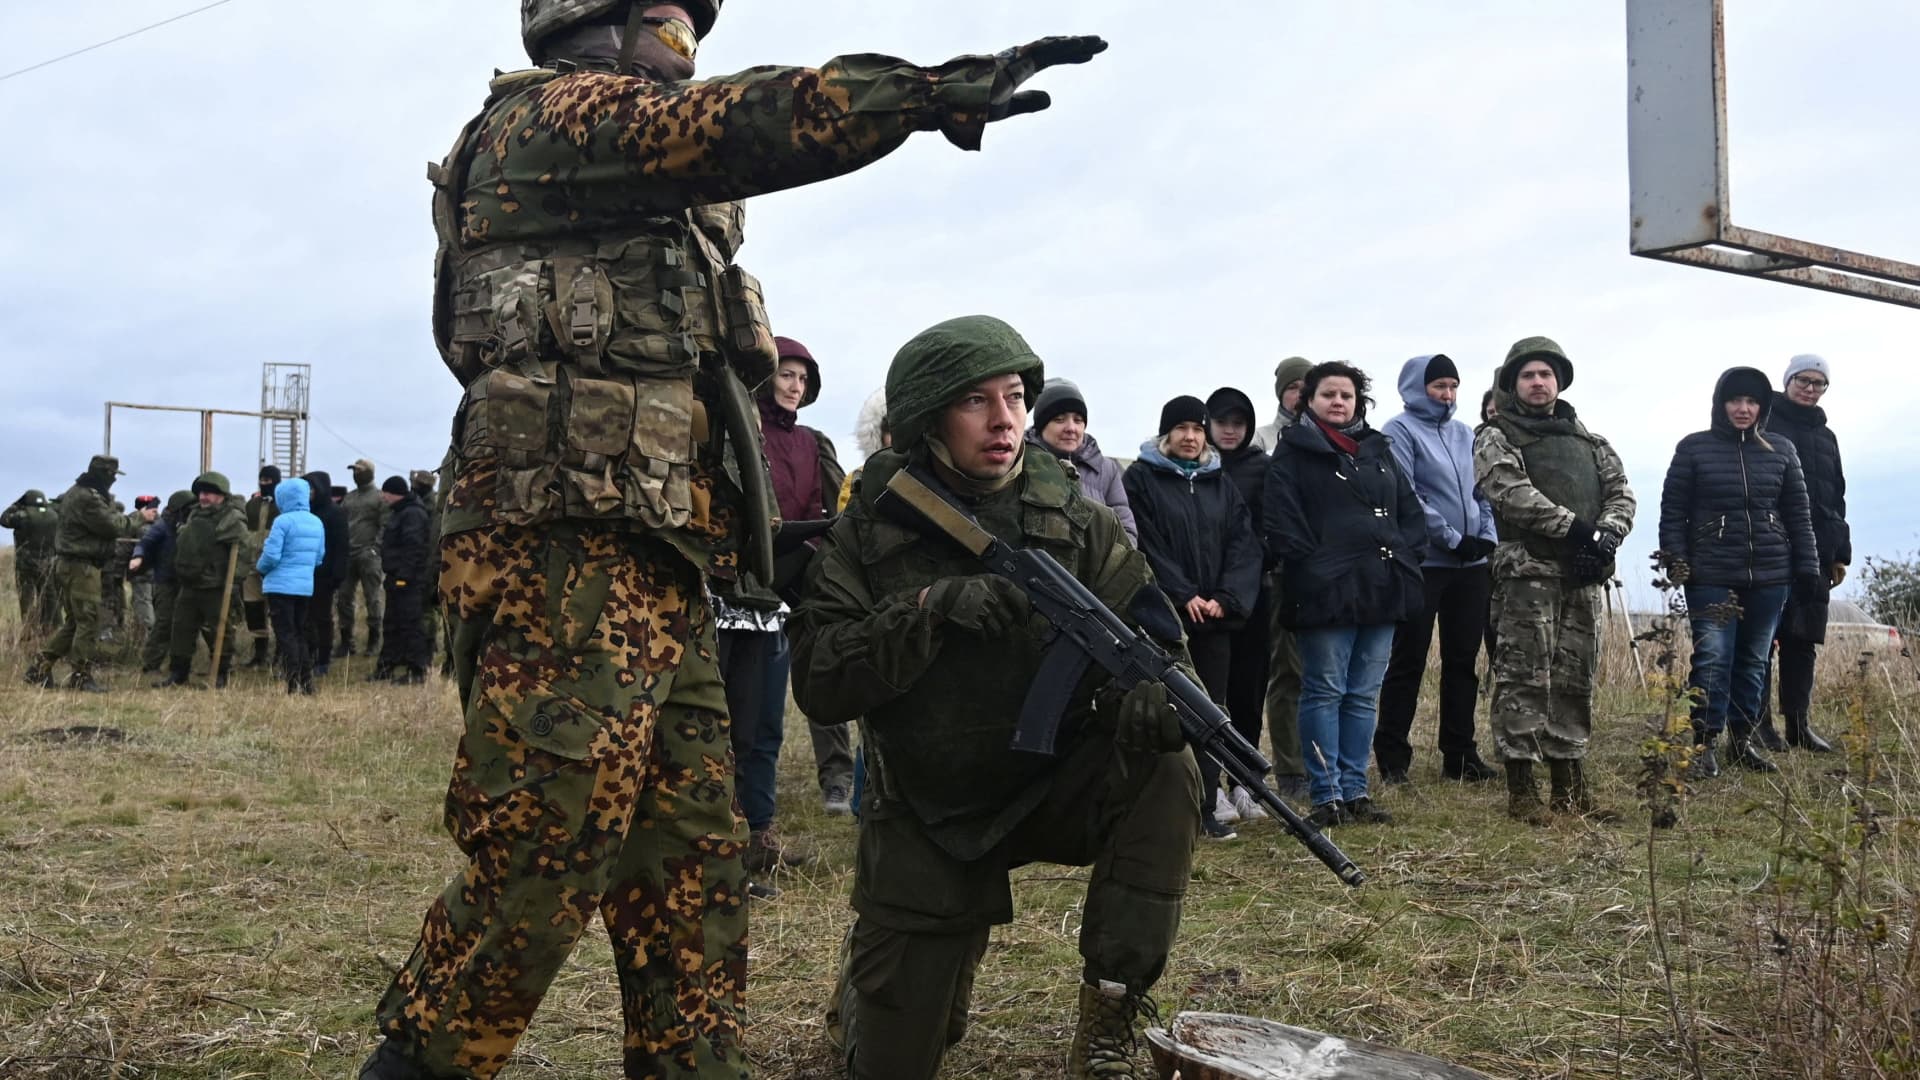 Participants listen to the instructor during a combat training session for civilians organized by local authorities at a range in Rostov Region, Russia October 21, 2022.